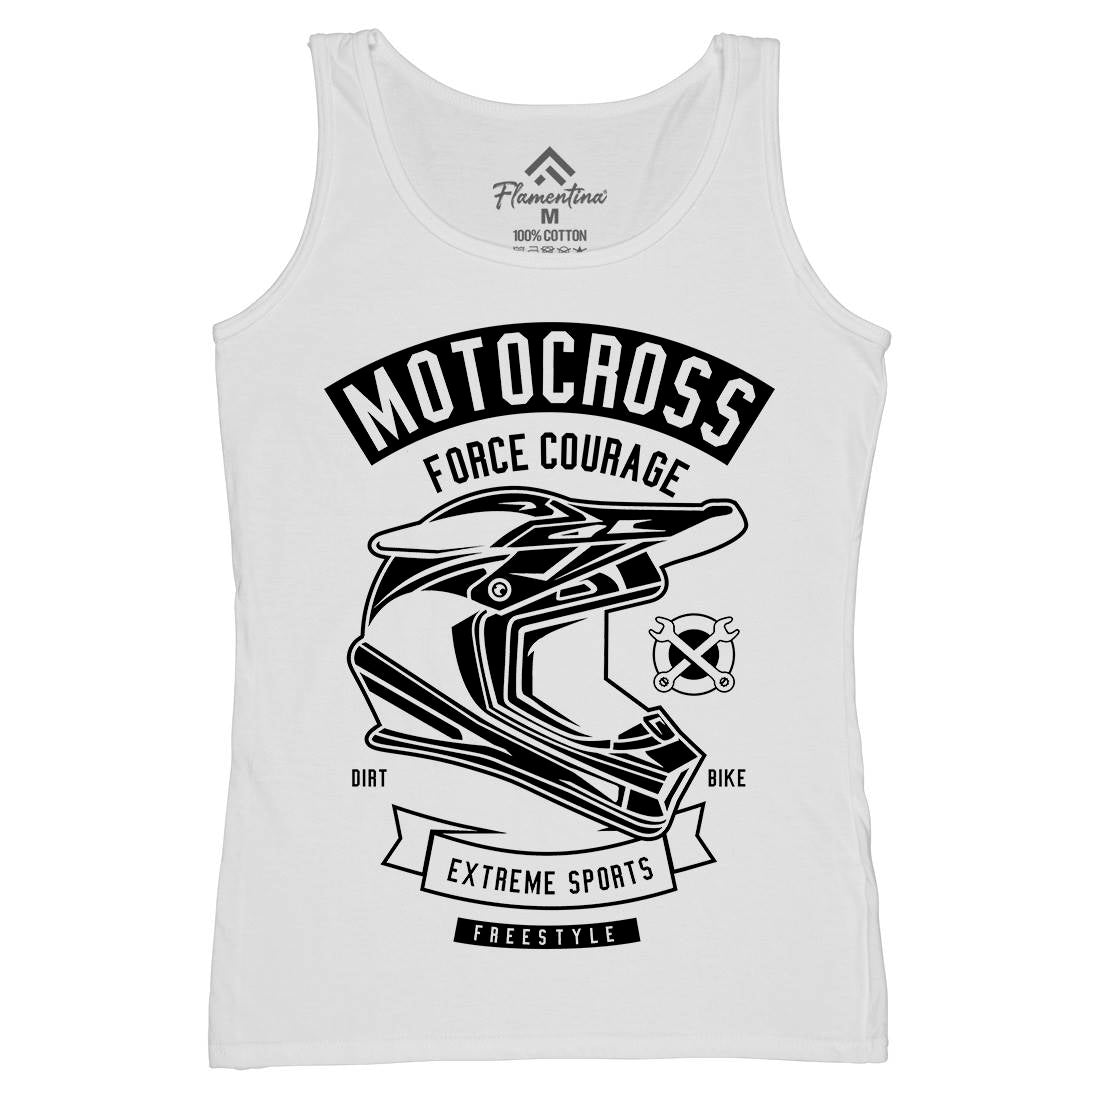 Motocross Force Courage Womens Organic Tank Top Vest Motorcycles B576